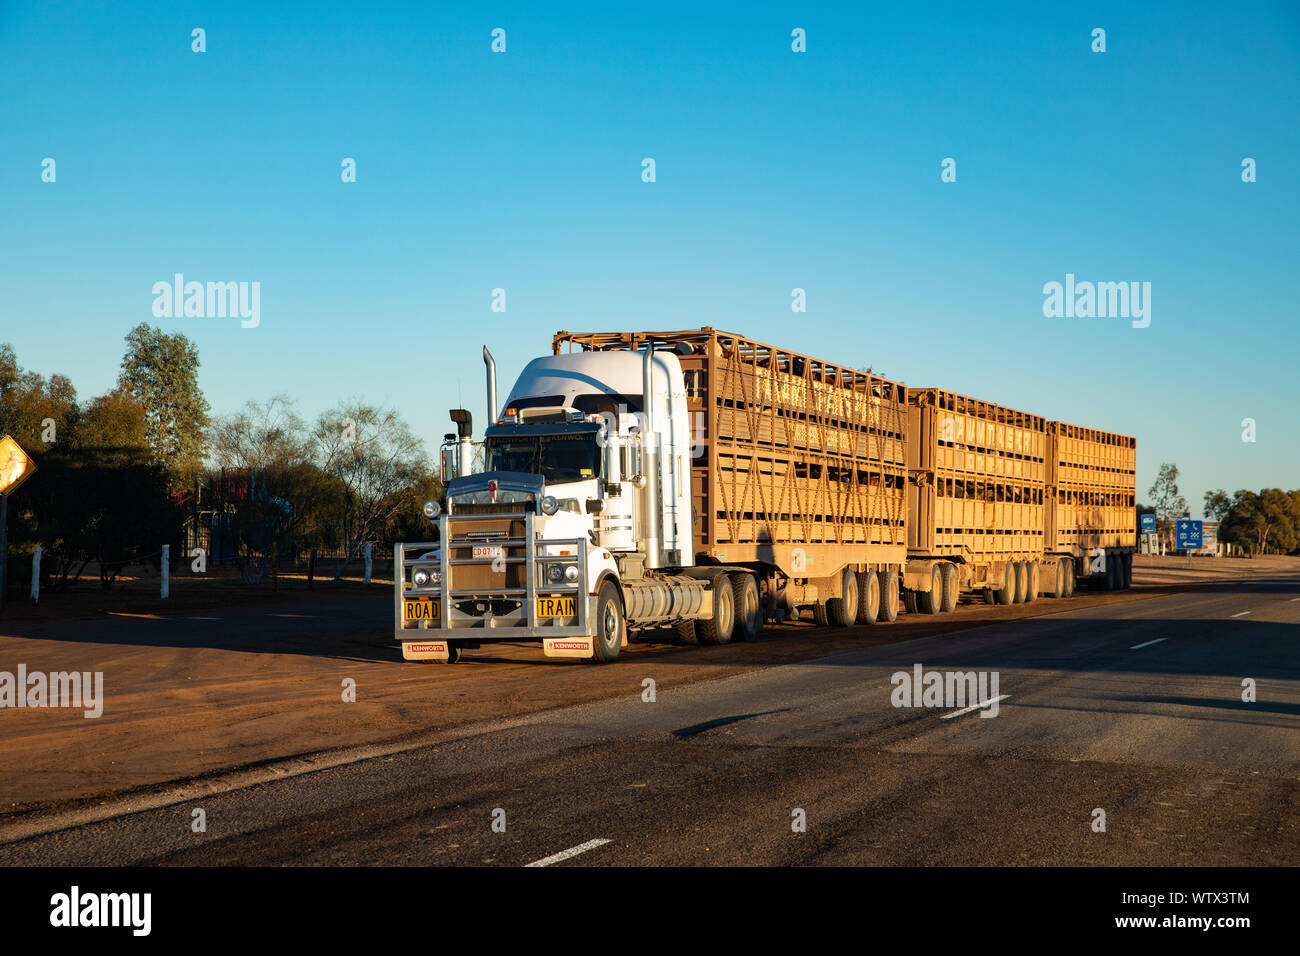 A road train in the Australian Outback loaded with cattle Stock Photo